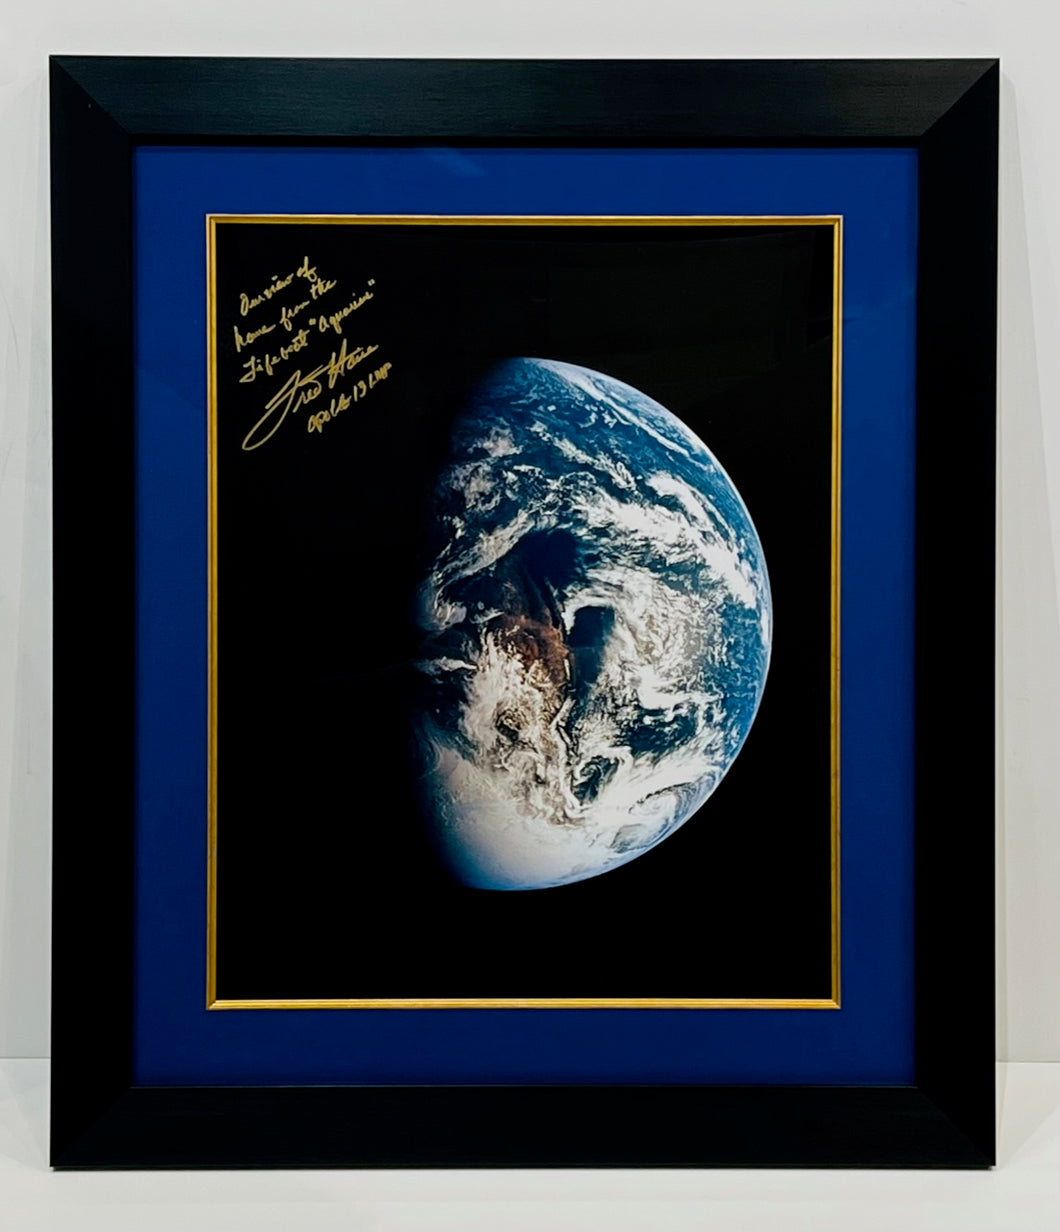 ASTRONAUT FRED HAISE  HAND-SIGNED AND INSCRIBED PHOTOGRAPH OF EARTH